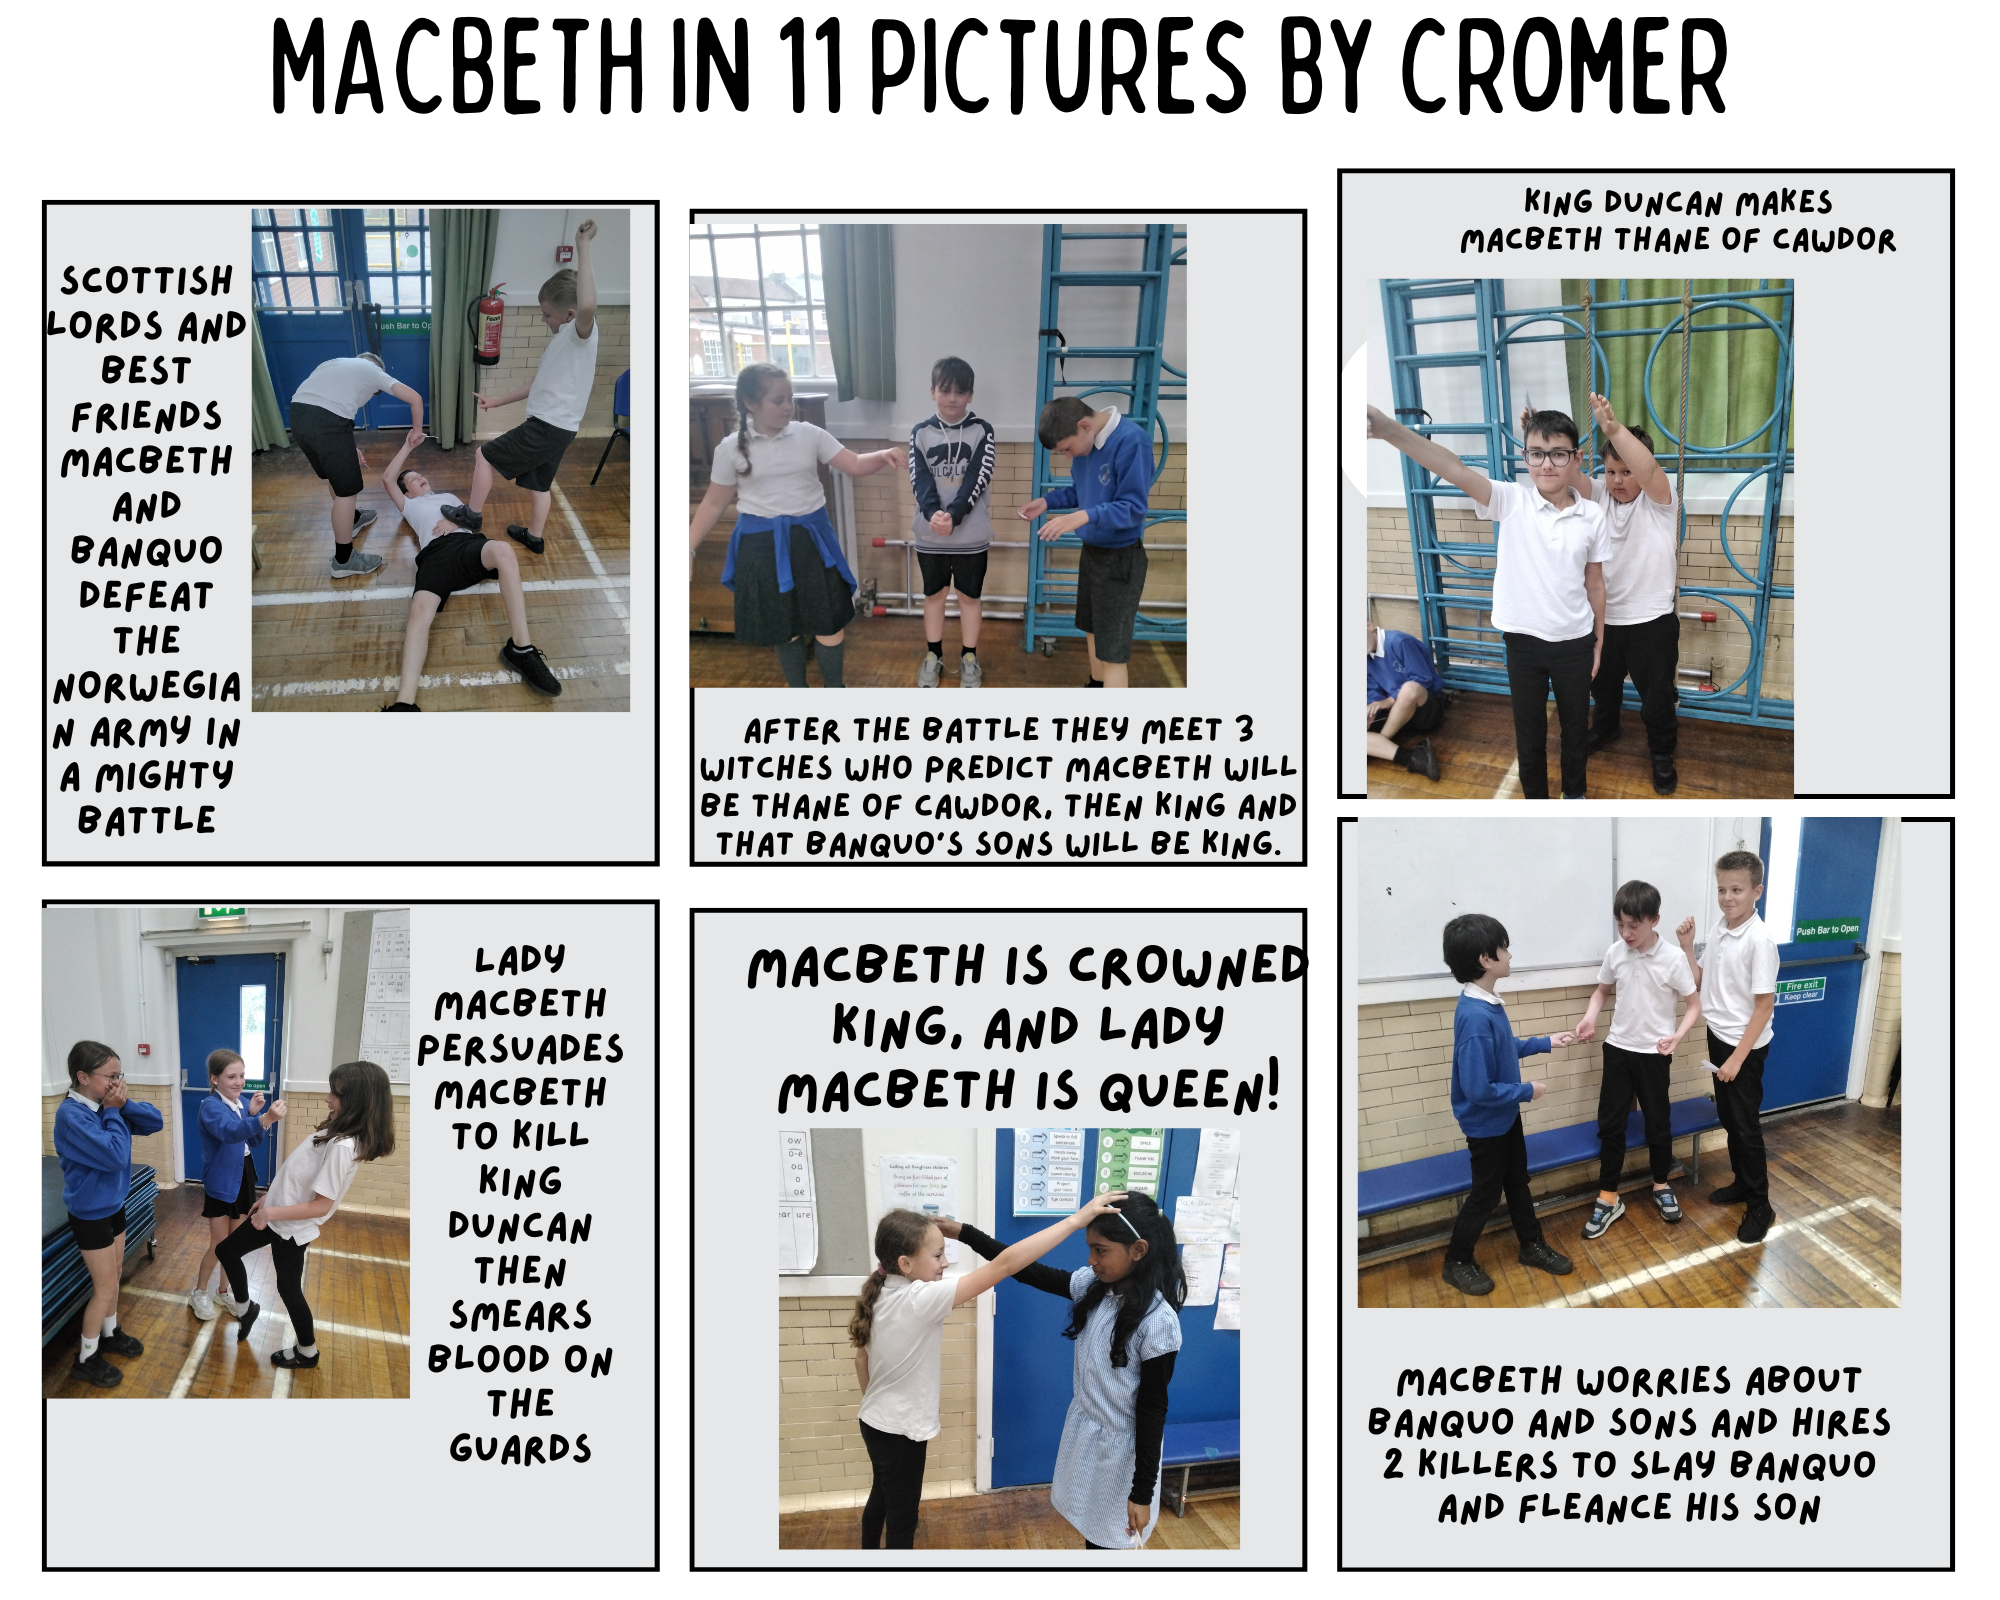 Children posing in role as characters from Macbeth